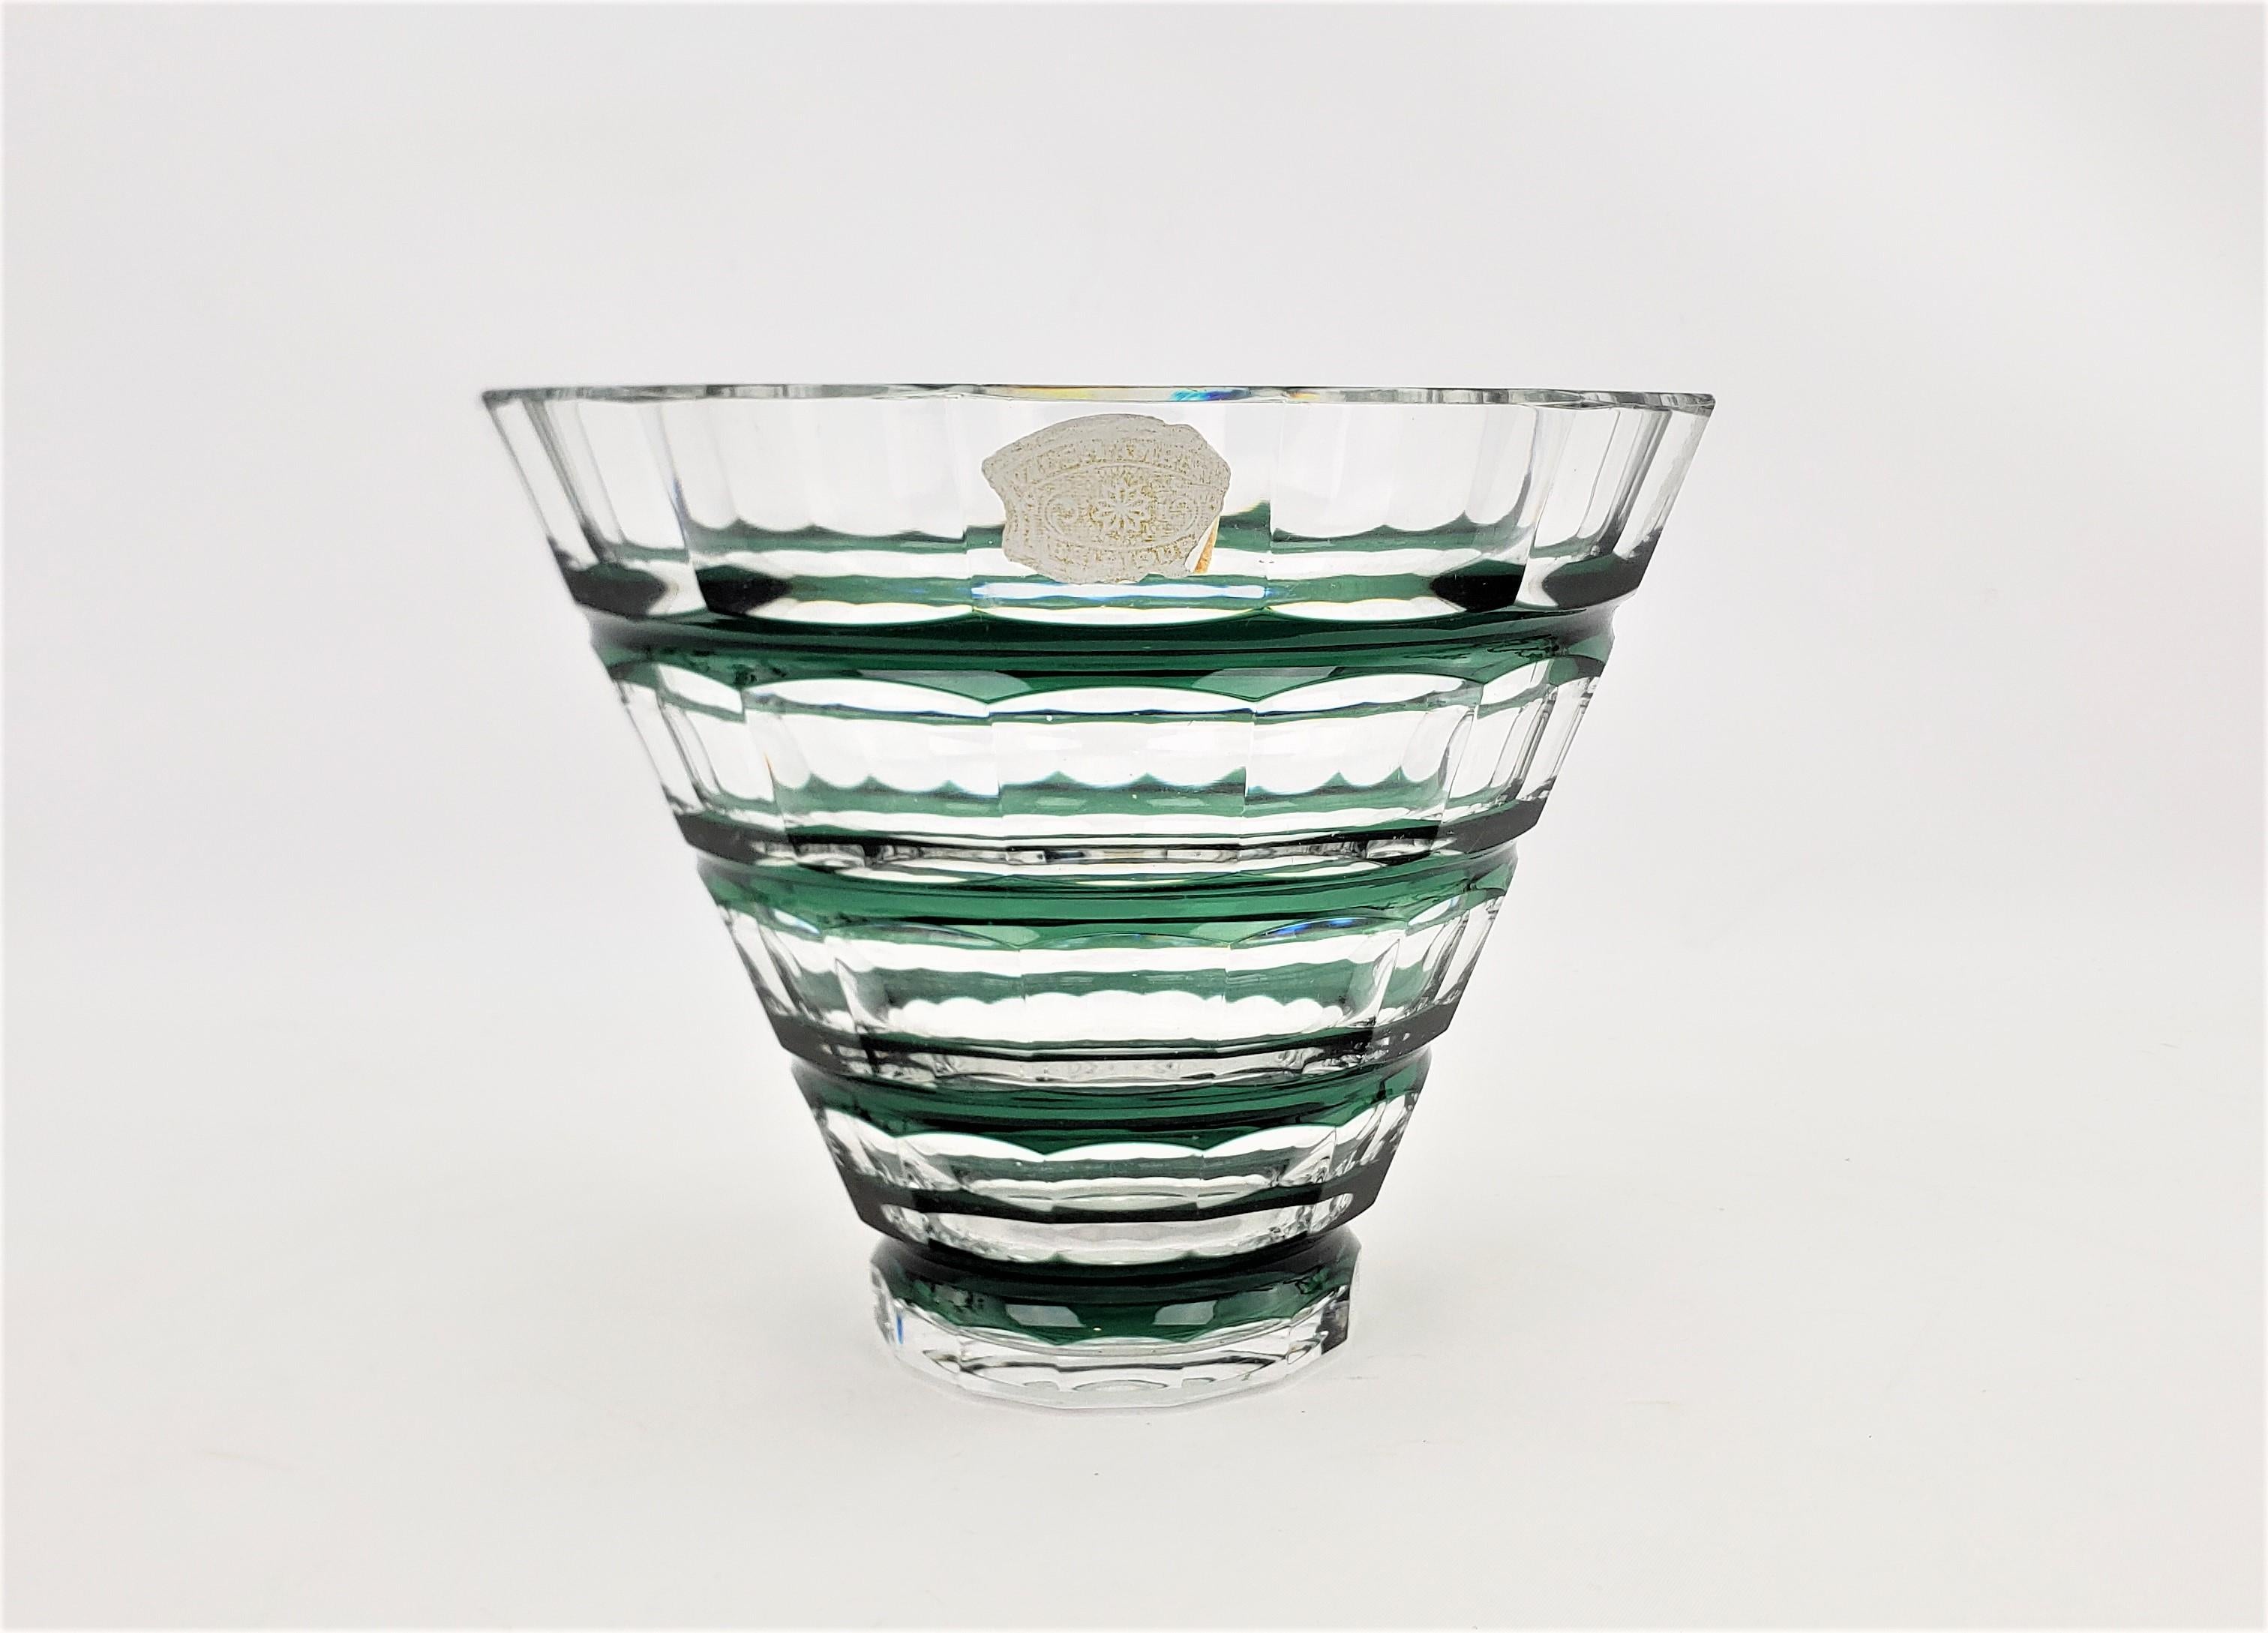 This cut crystal vase or bowl was made by the renowned Belgian glass factory of Val Saint Lambert in approximately 1965 in a period Mid-Century style. The bowl is done in a clear crystal glass with a deep green banded accents. The vase is signed